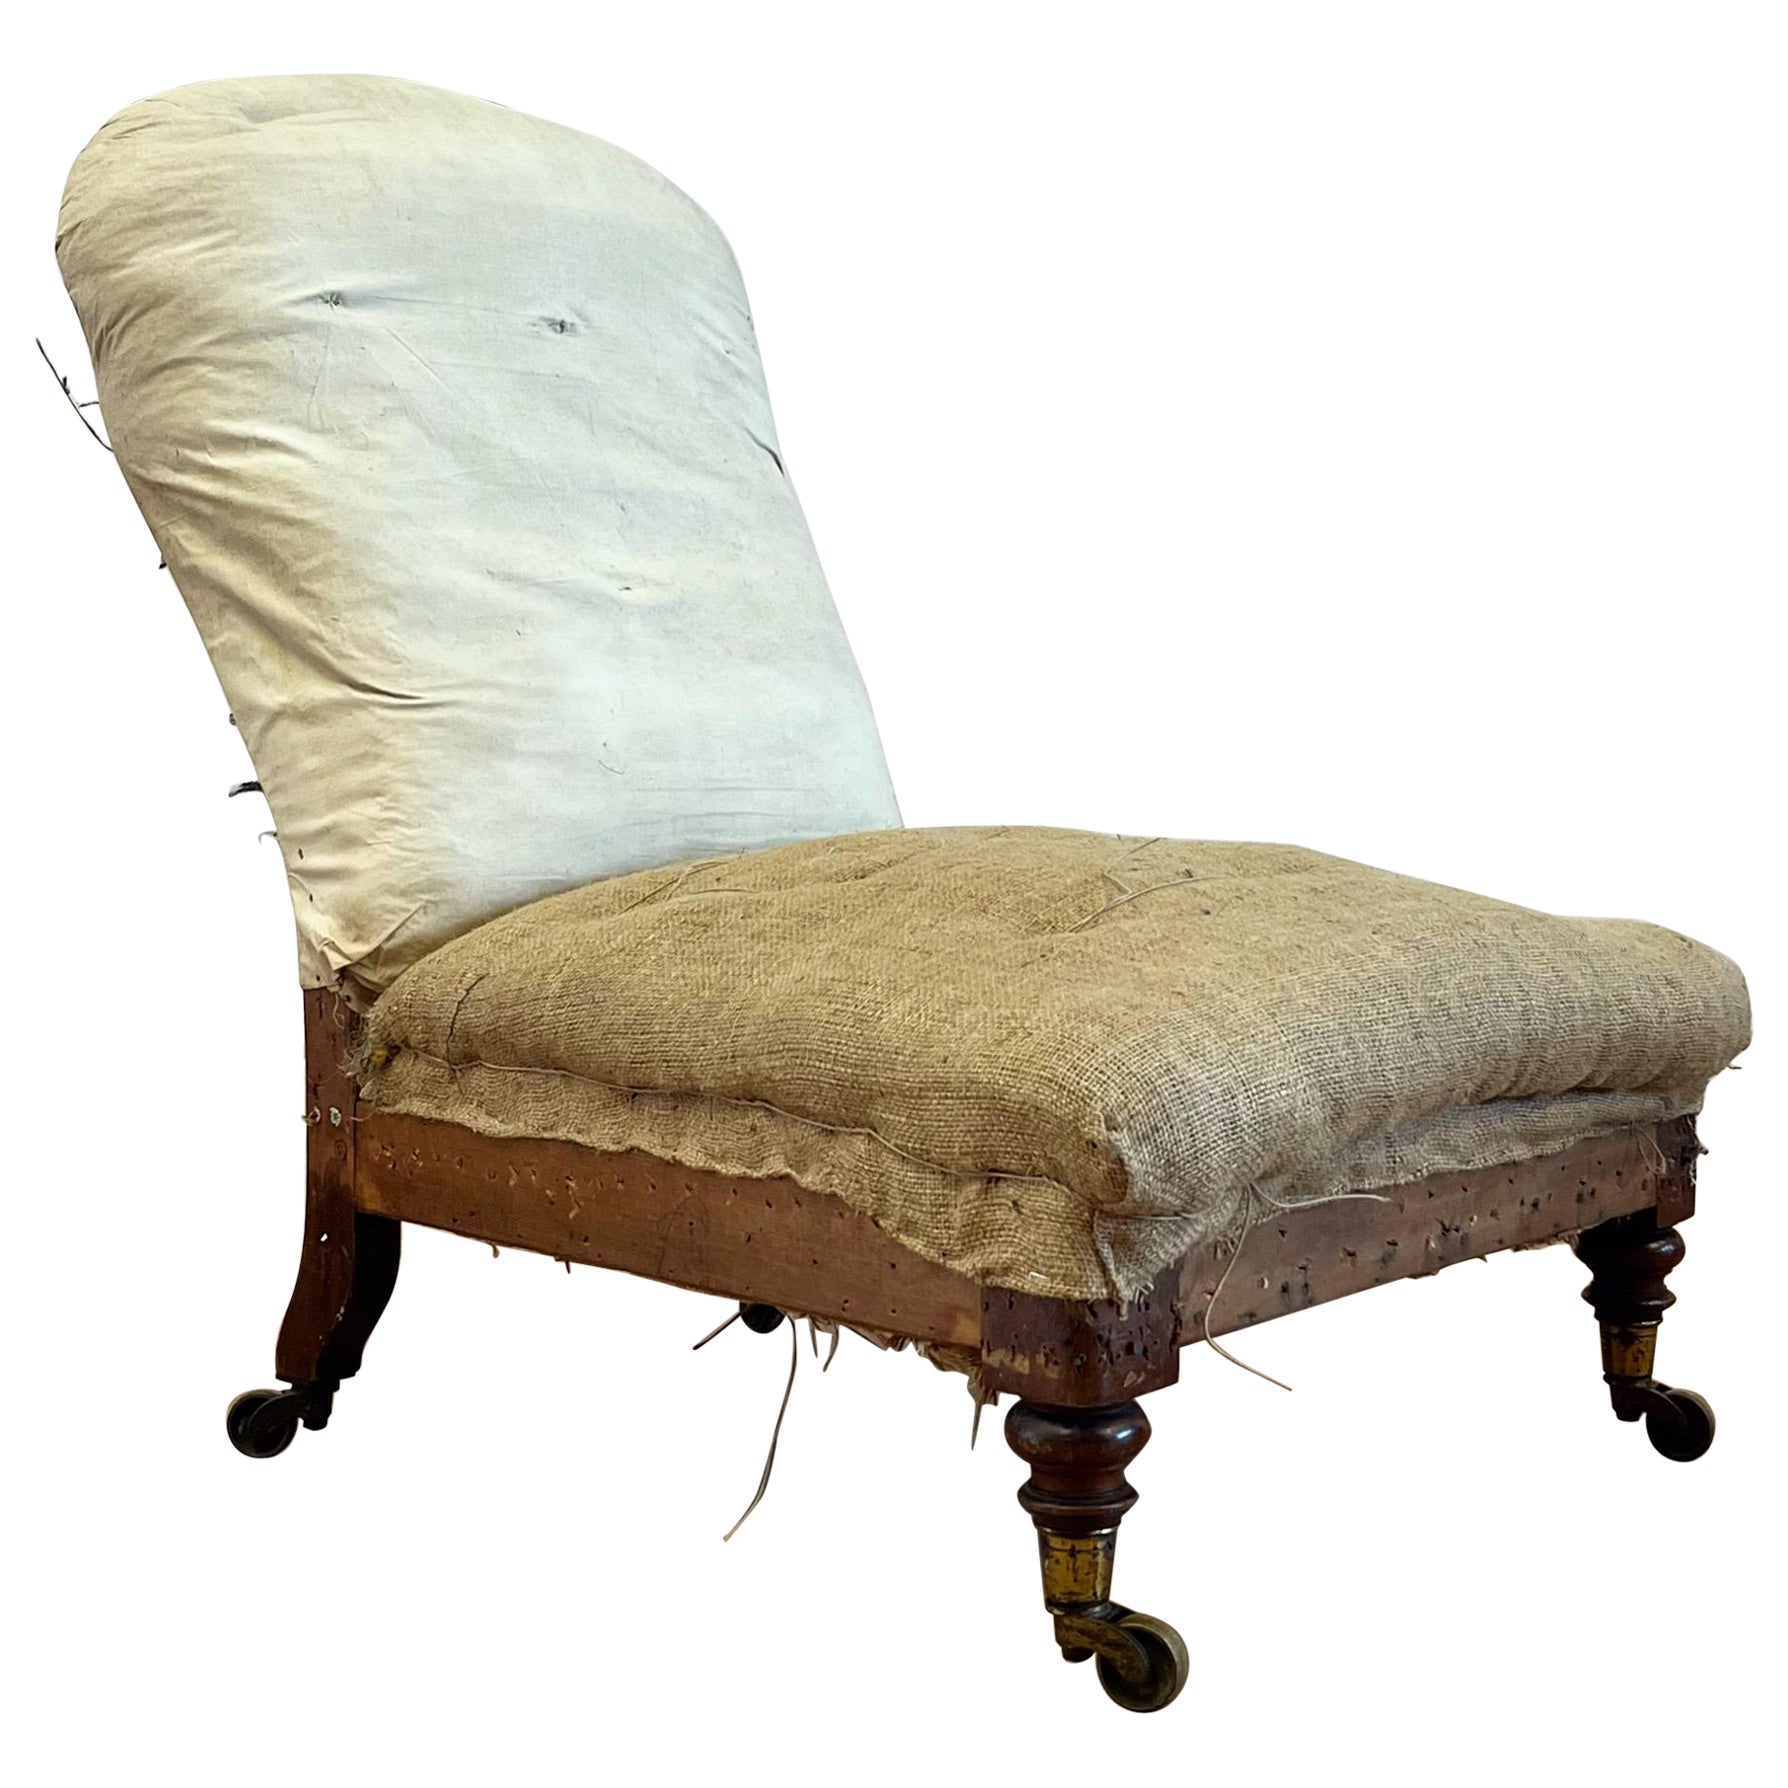 A Mid Nineteenth Century Early Howard & Sons Baloon Back Slipper Chair  For Sale